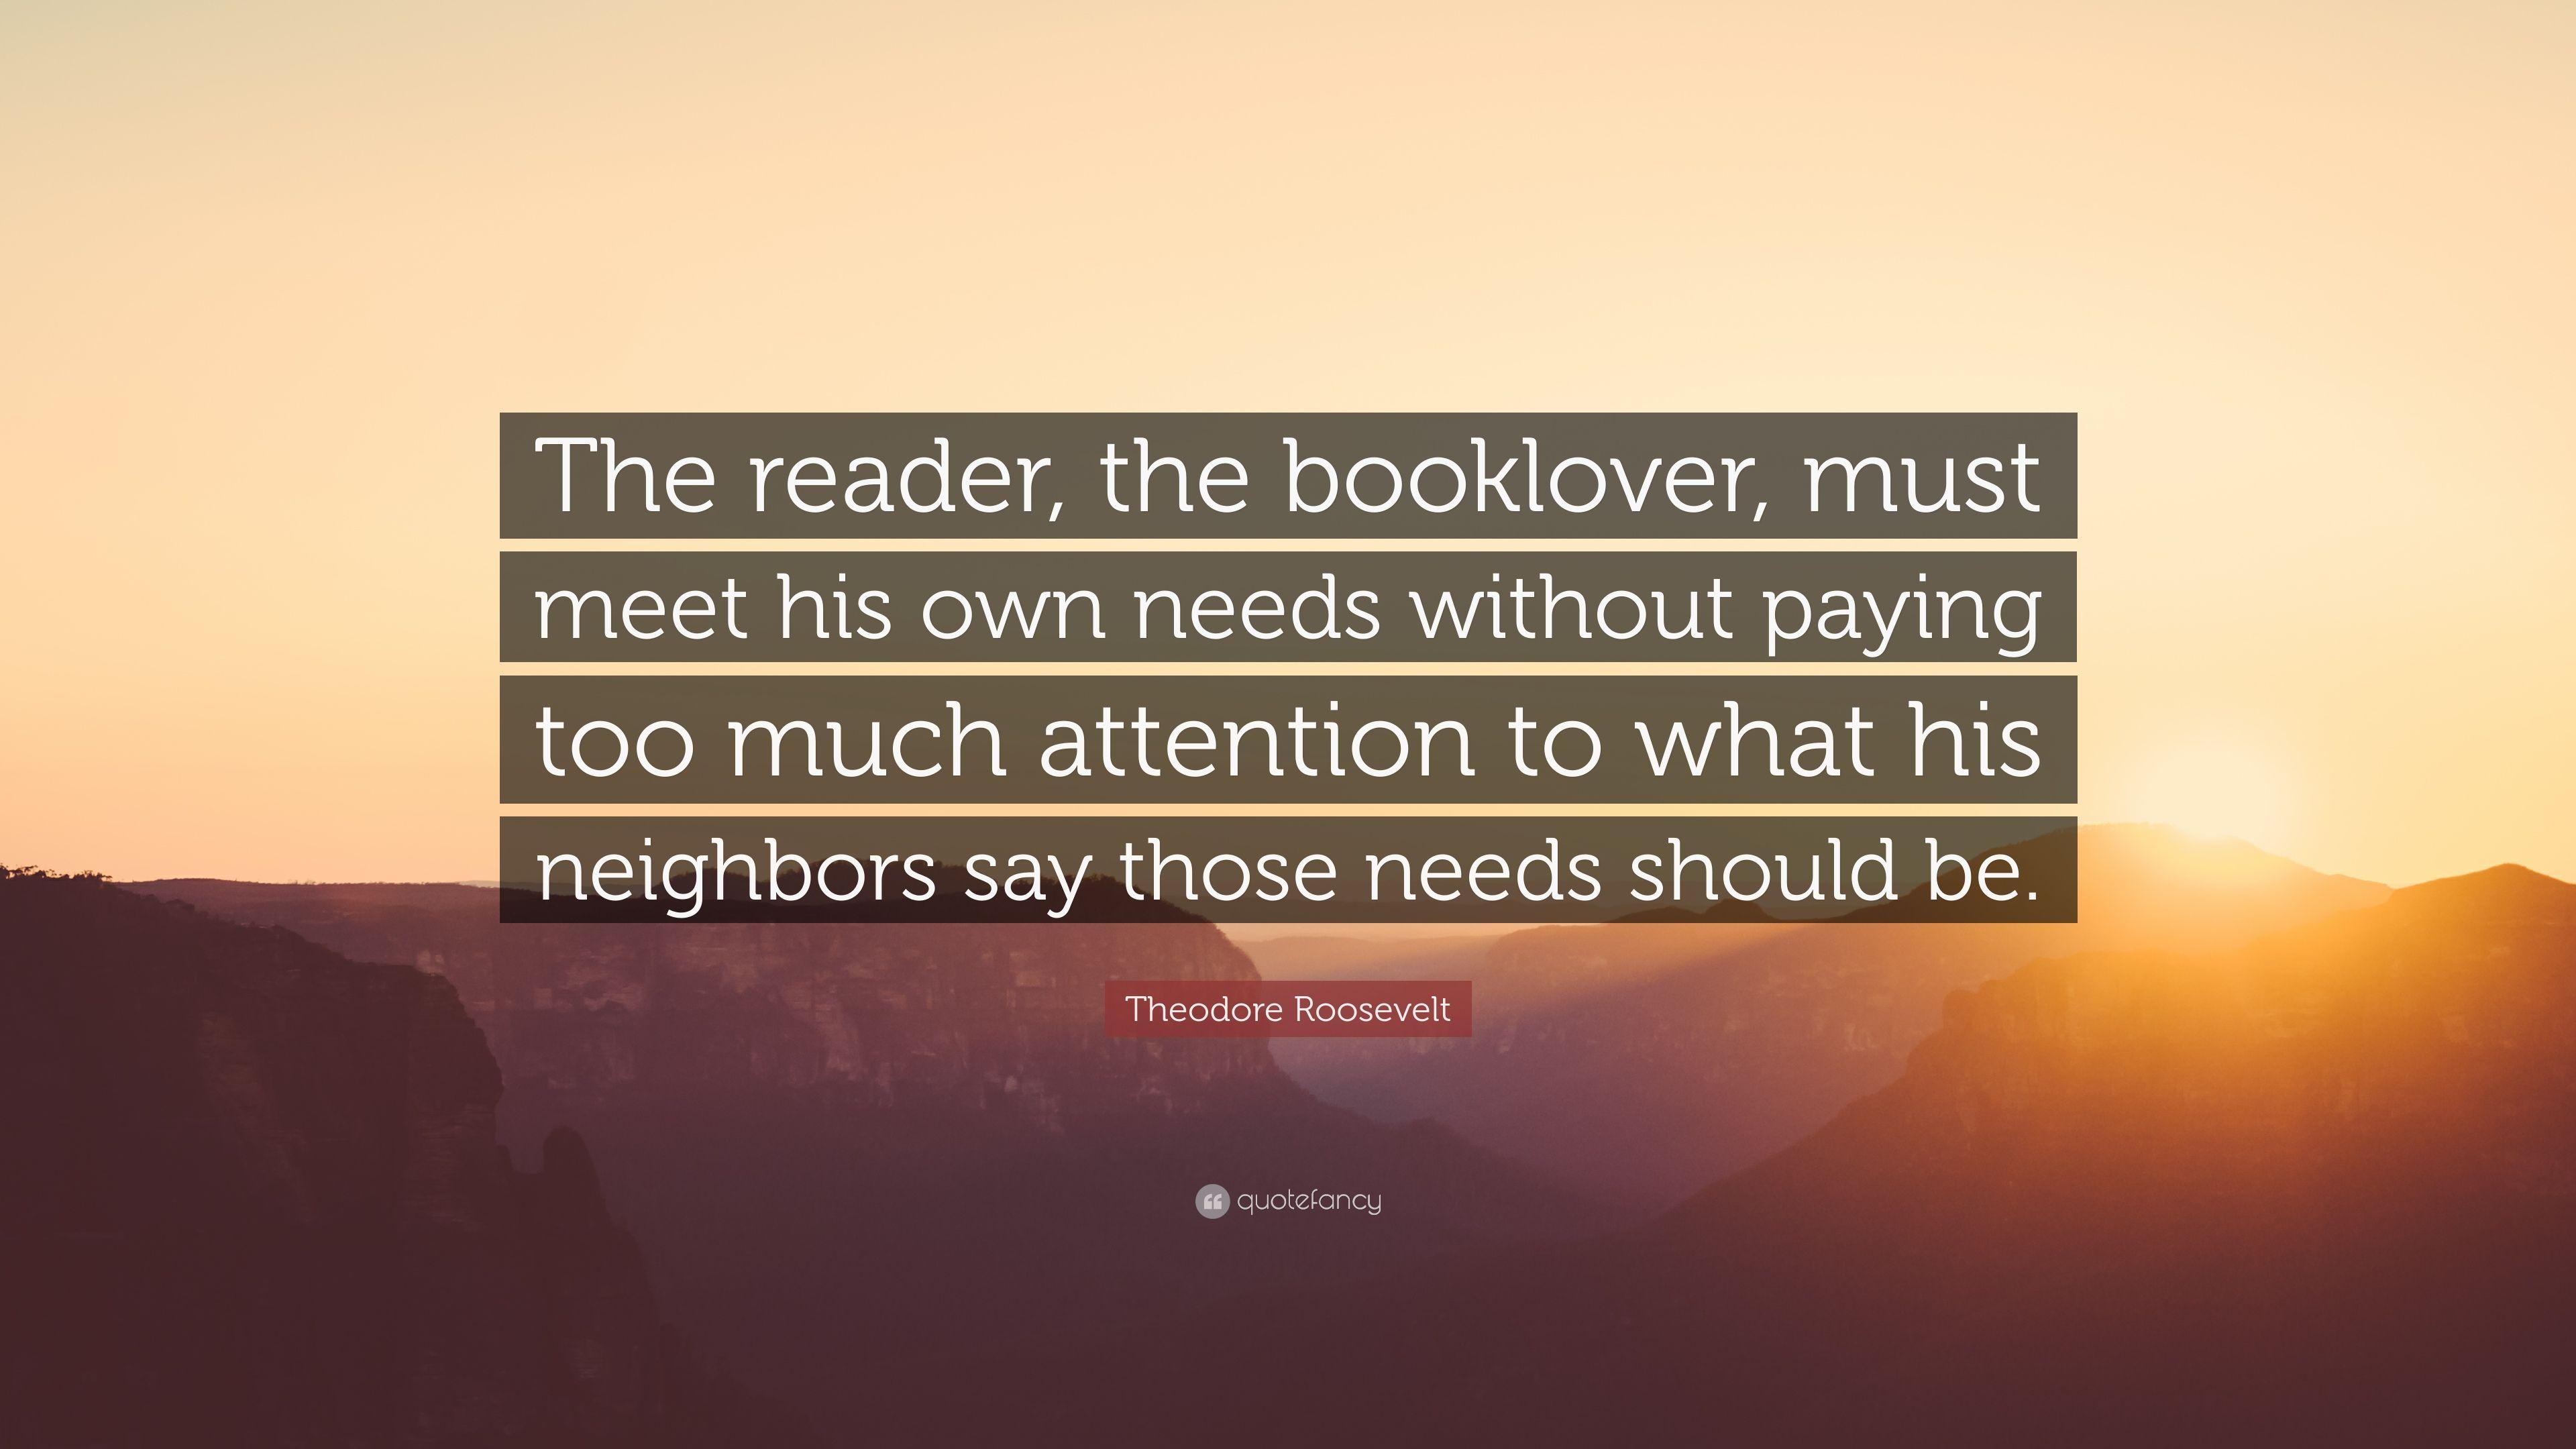 Theodore Roosevelt Quote: “The reader, the booklover, must meet